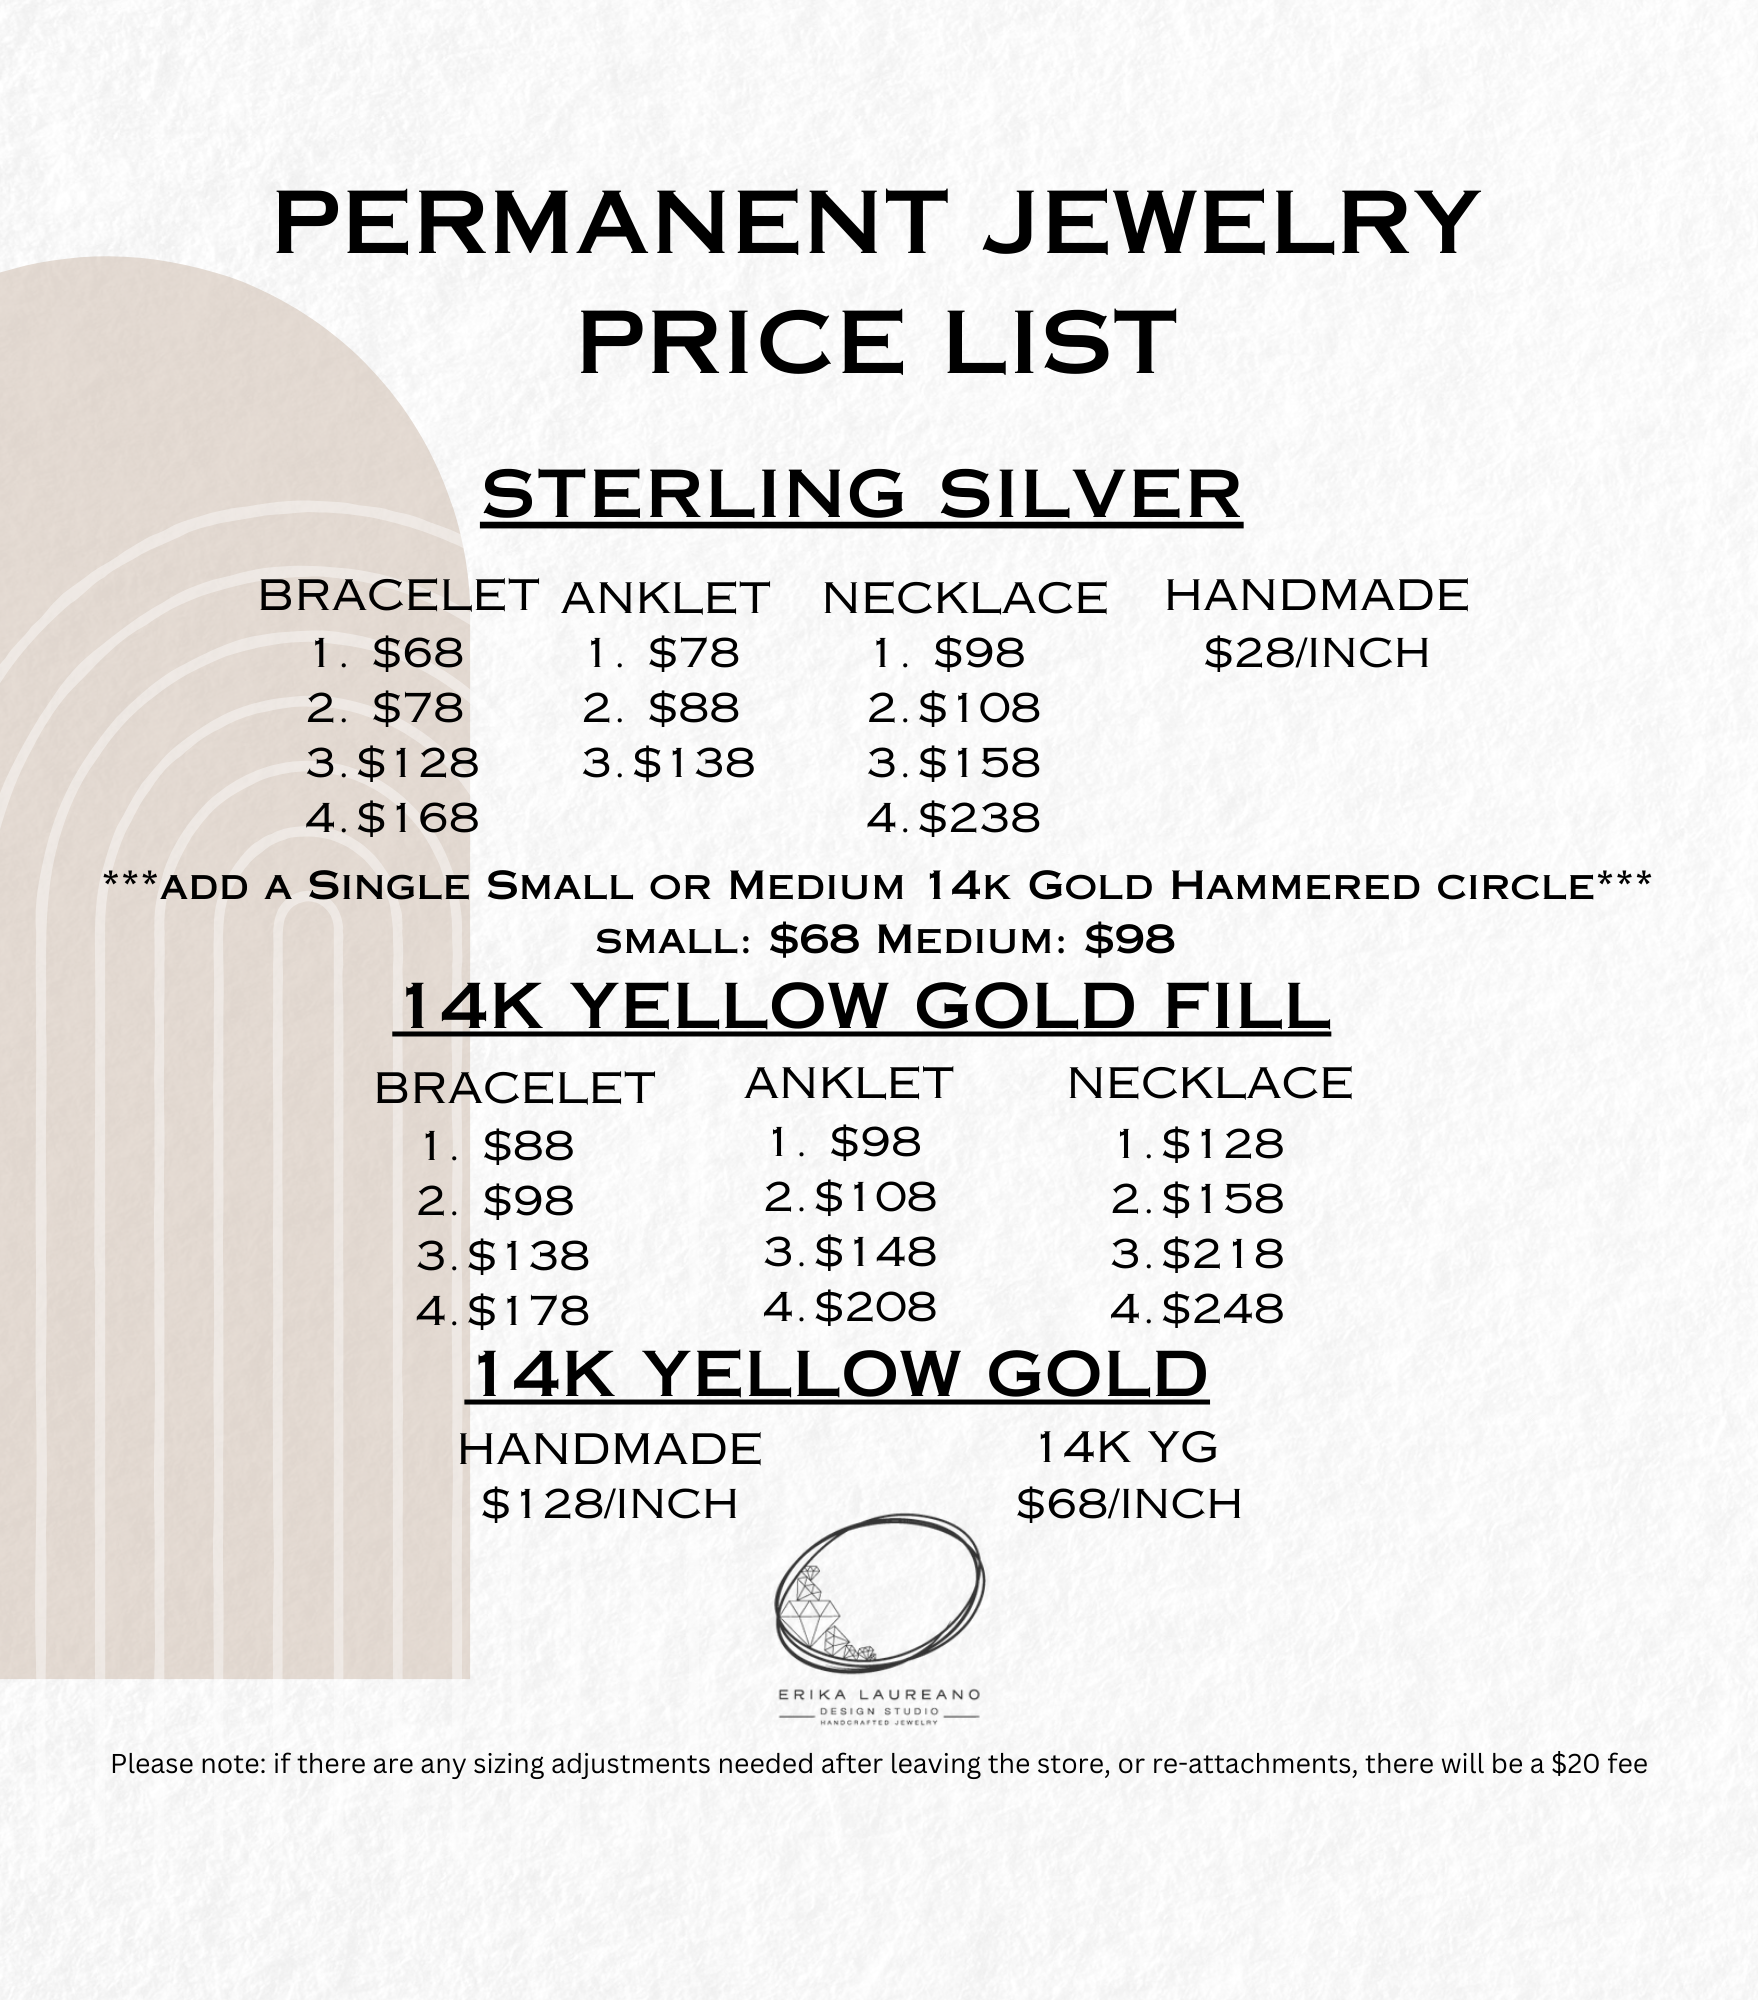 Permanent Jewelry Price List (8.5 × 8.5 in) (6 x 6 in) (7.25 x 8.25 in).png